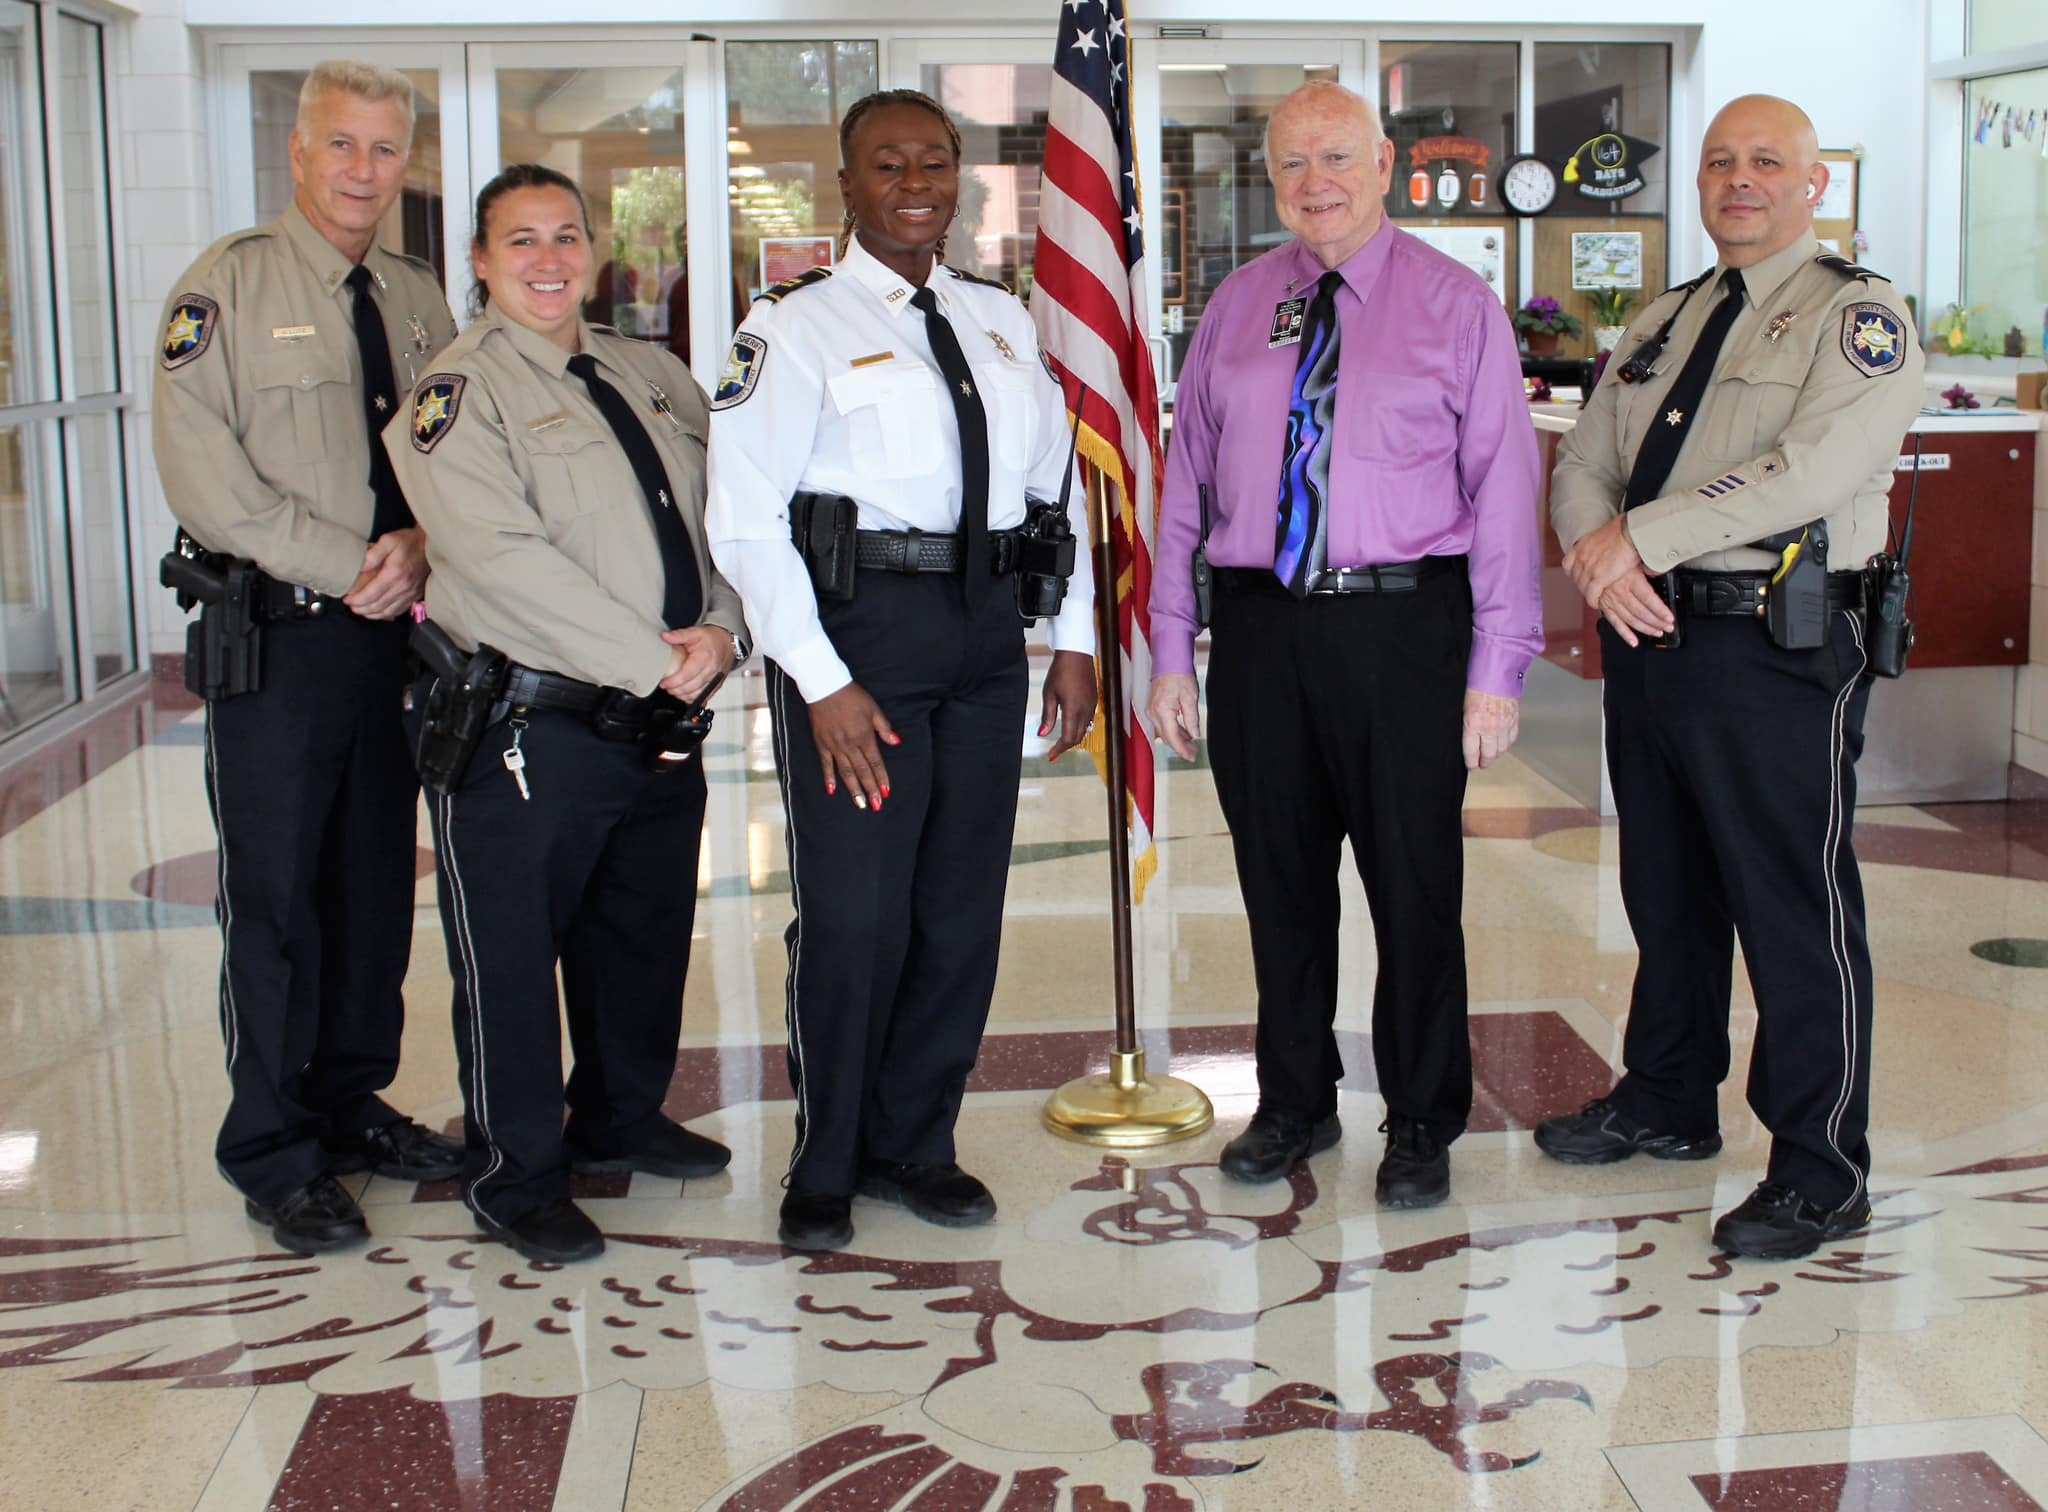 SBSO ‘Keeping Our Schools Safe’ 

The St. Bernard Sheriff’s Office headed back to school this week